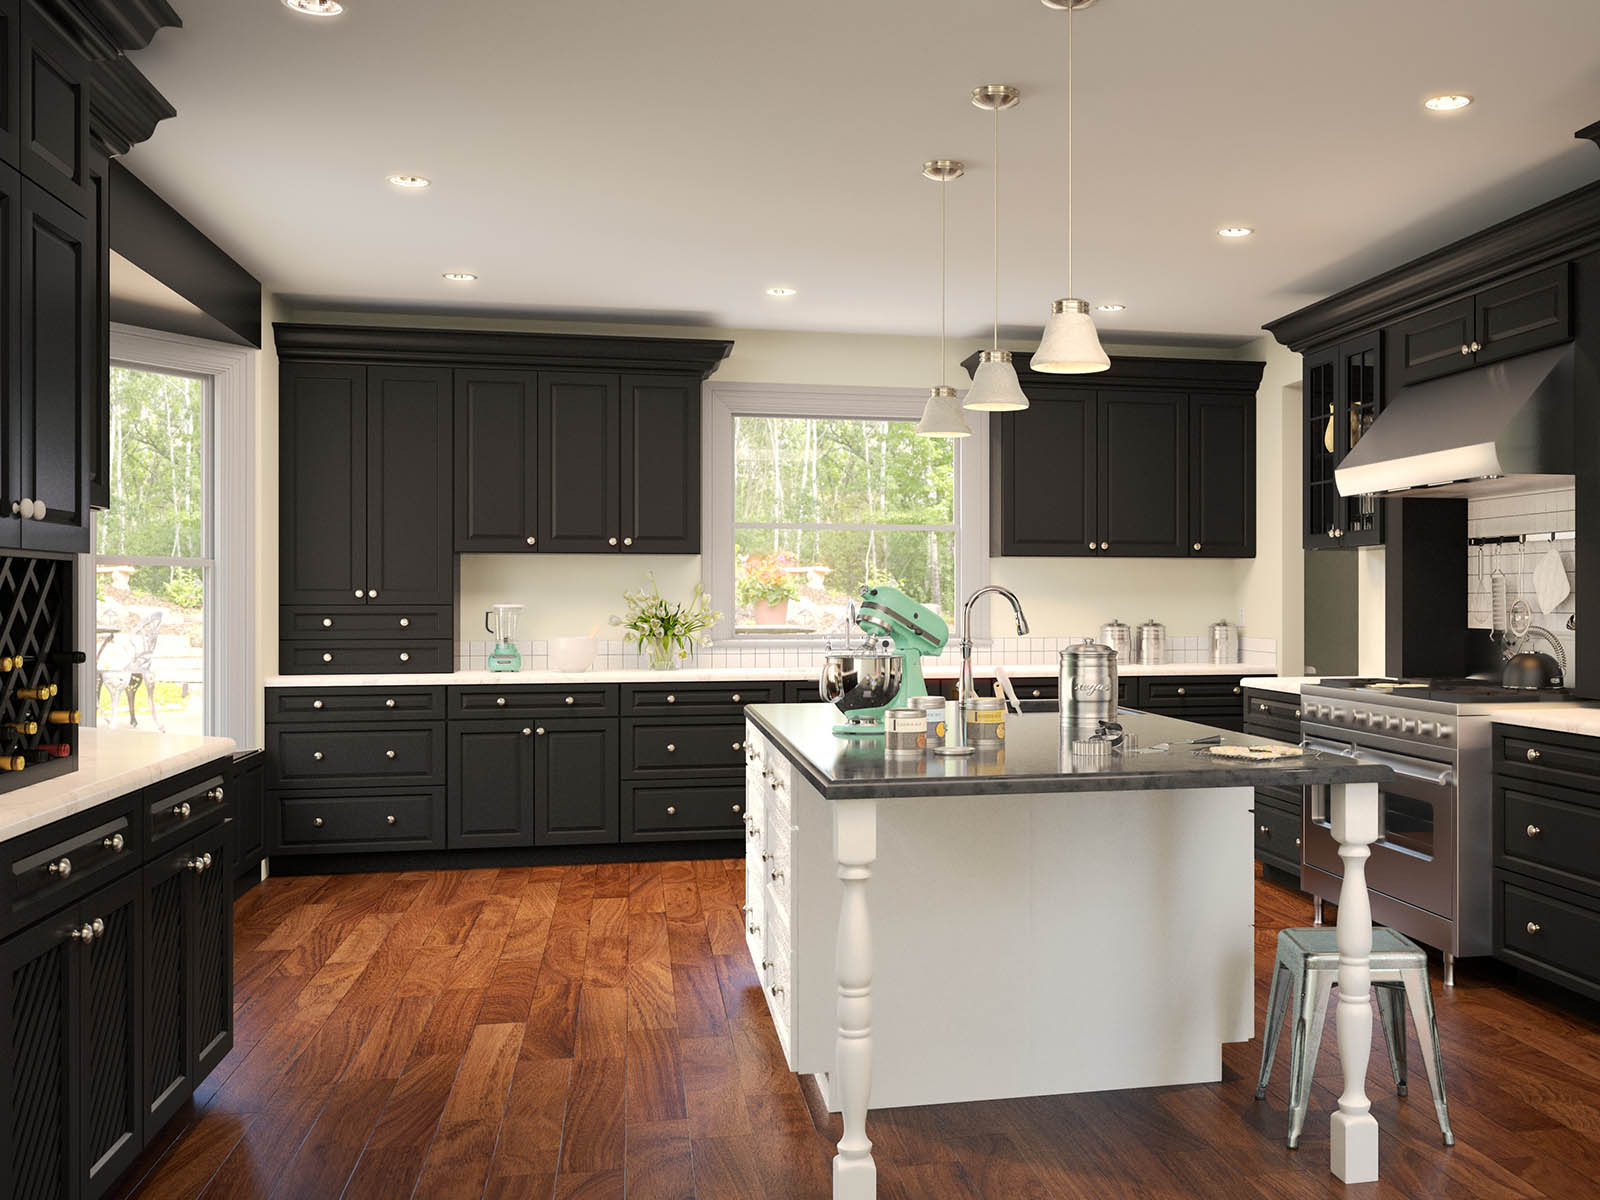 Fully light black colored kitchen with white accent and fancy countertops